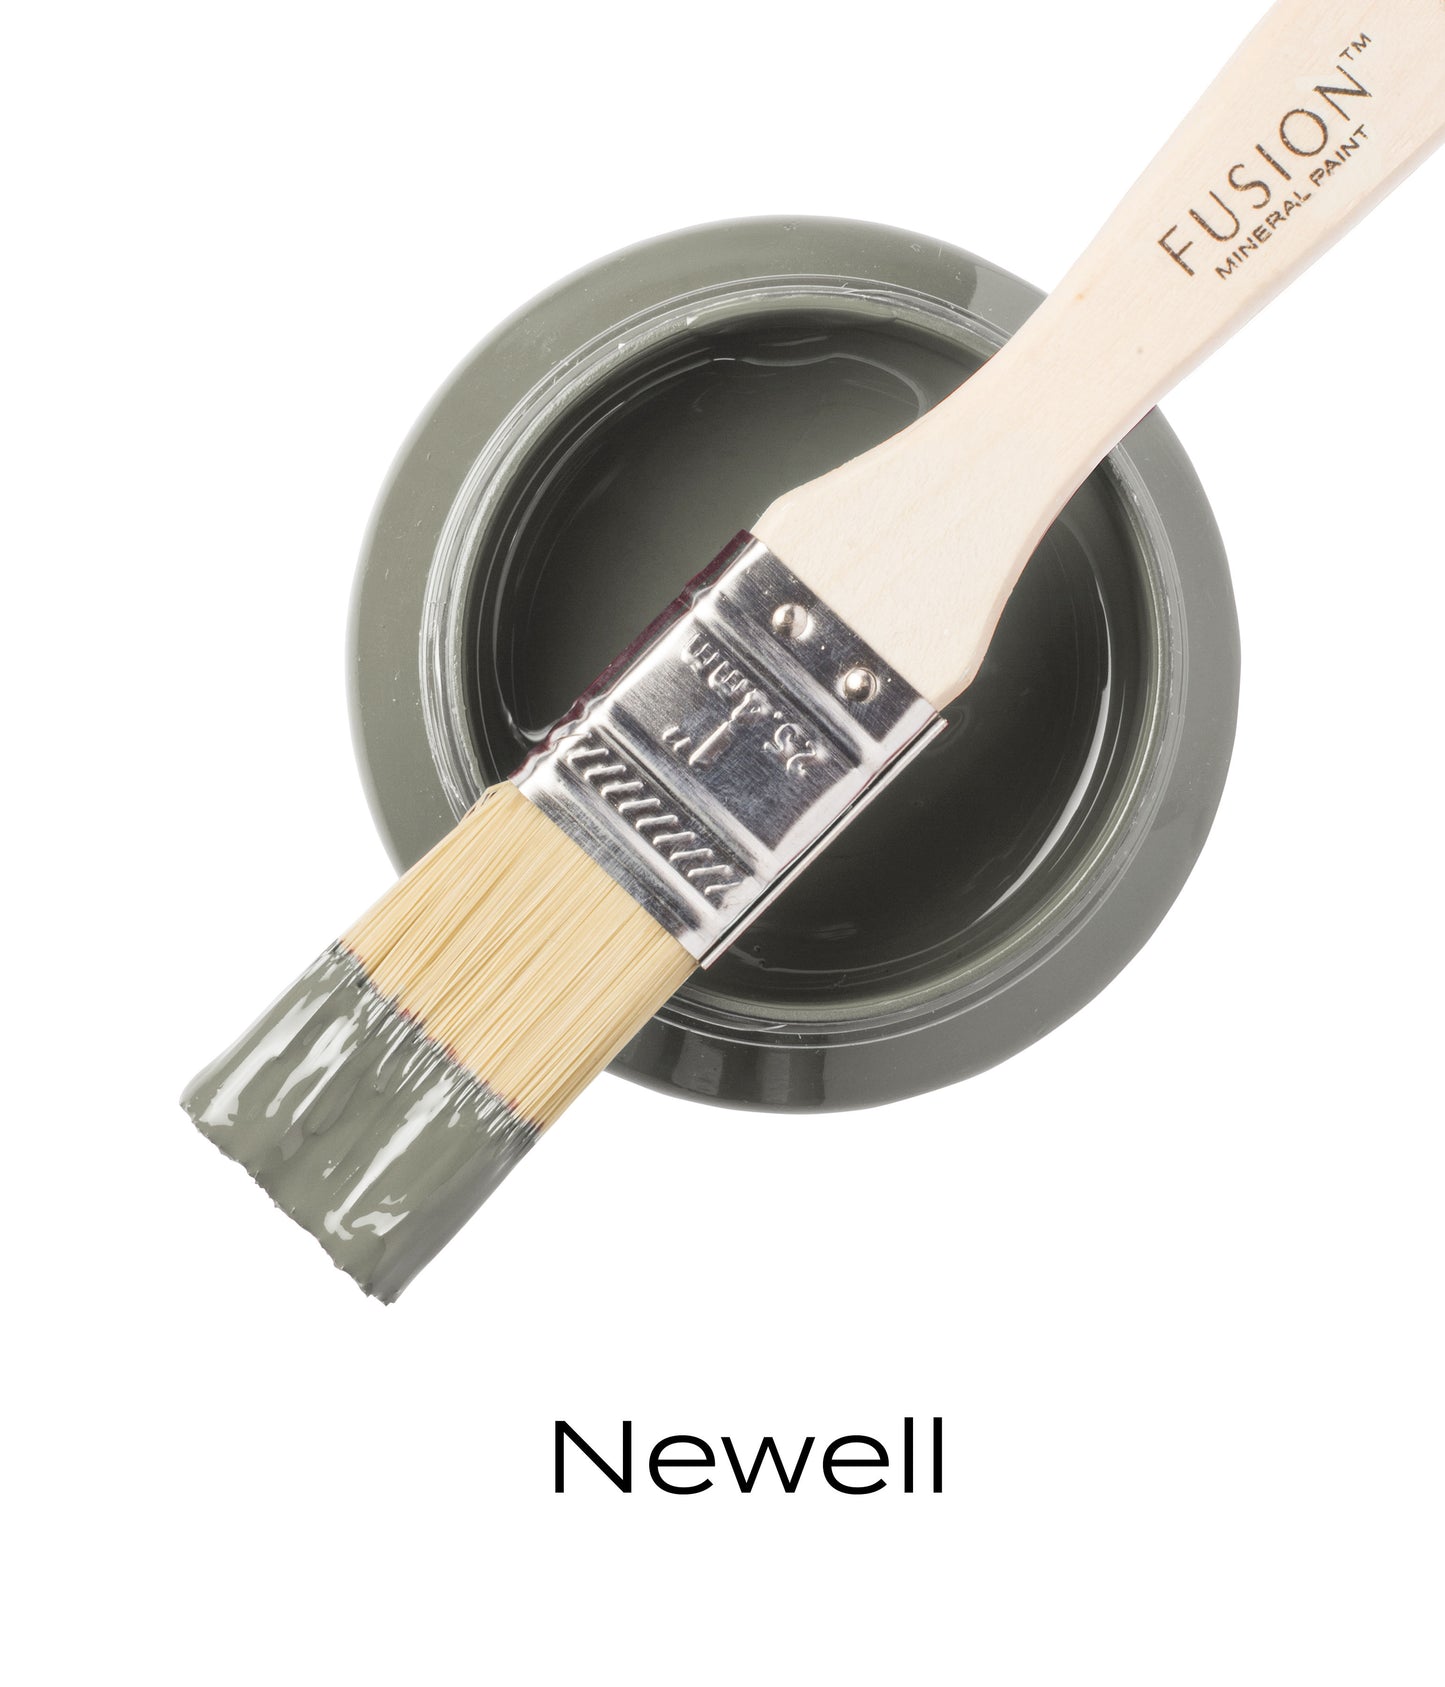 Newell - Fusion Mineral Paint